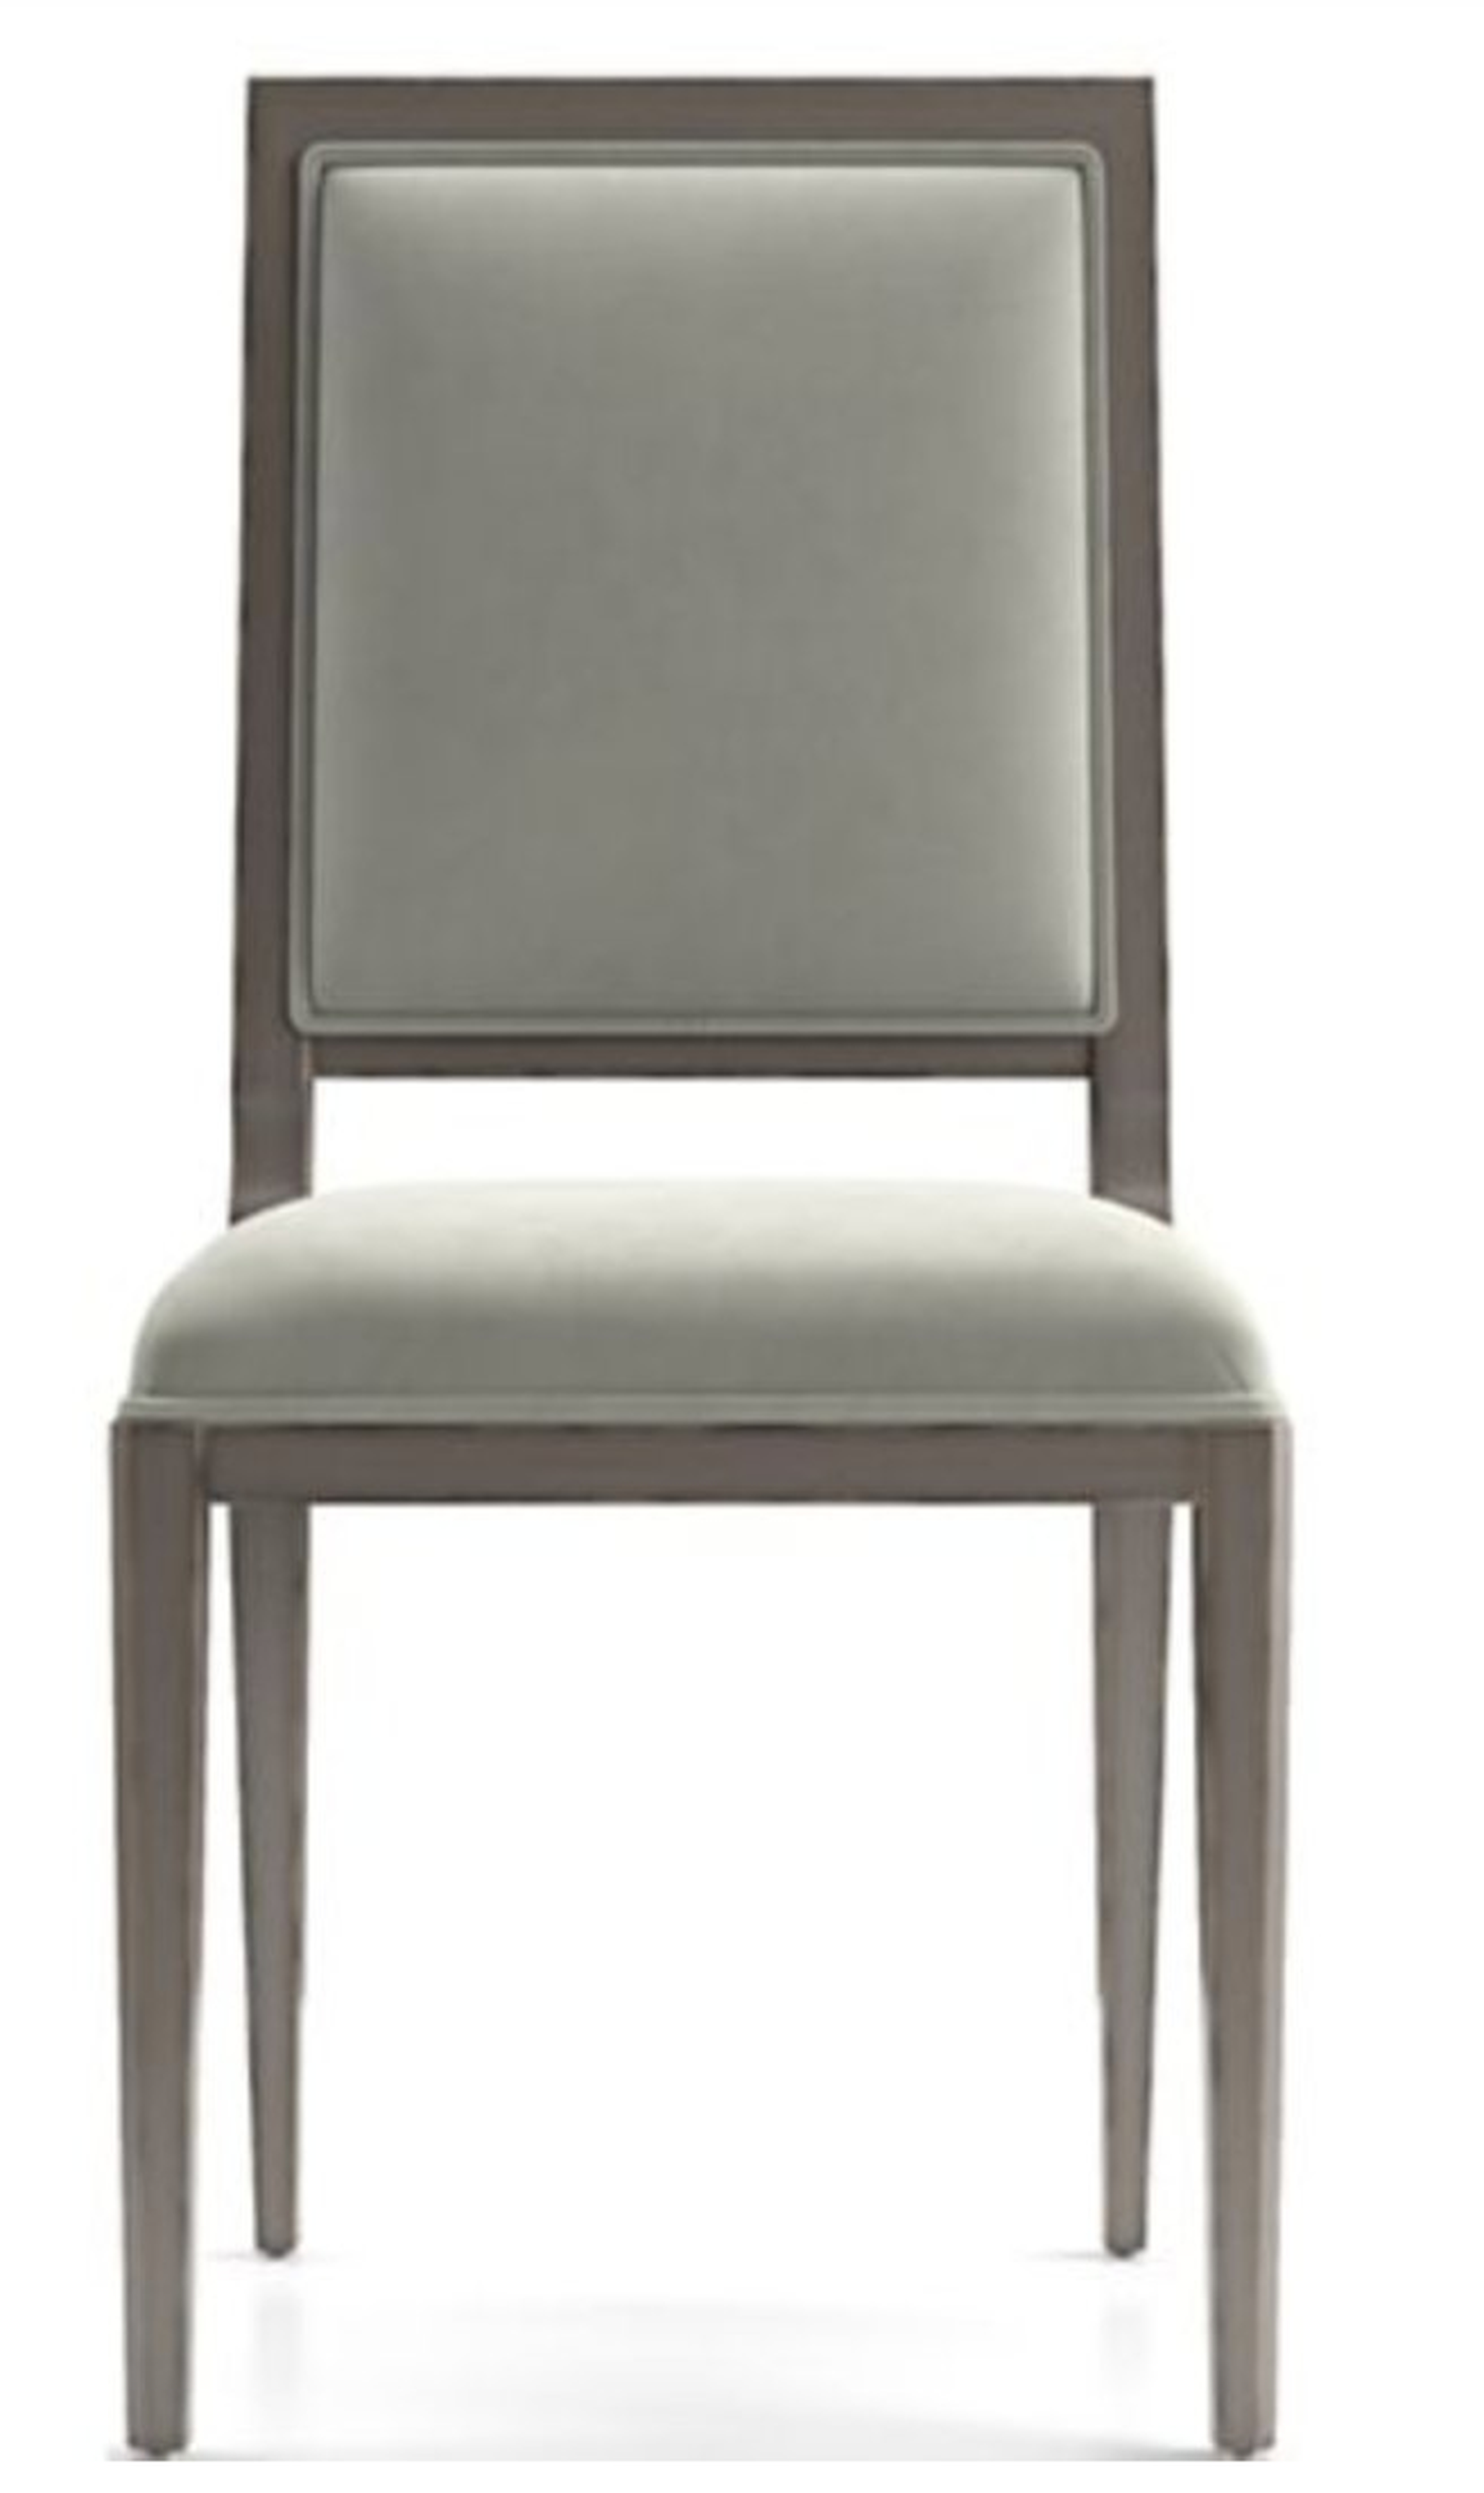 Sonata Velvet Handpainted Dining Chair - Crate and Barrel